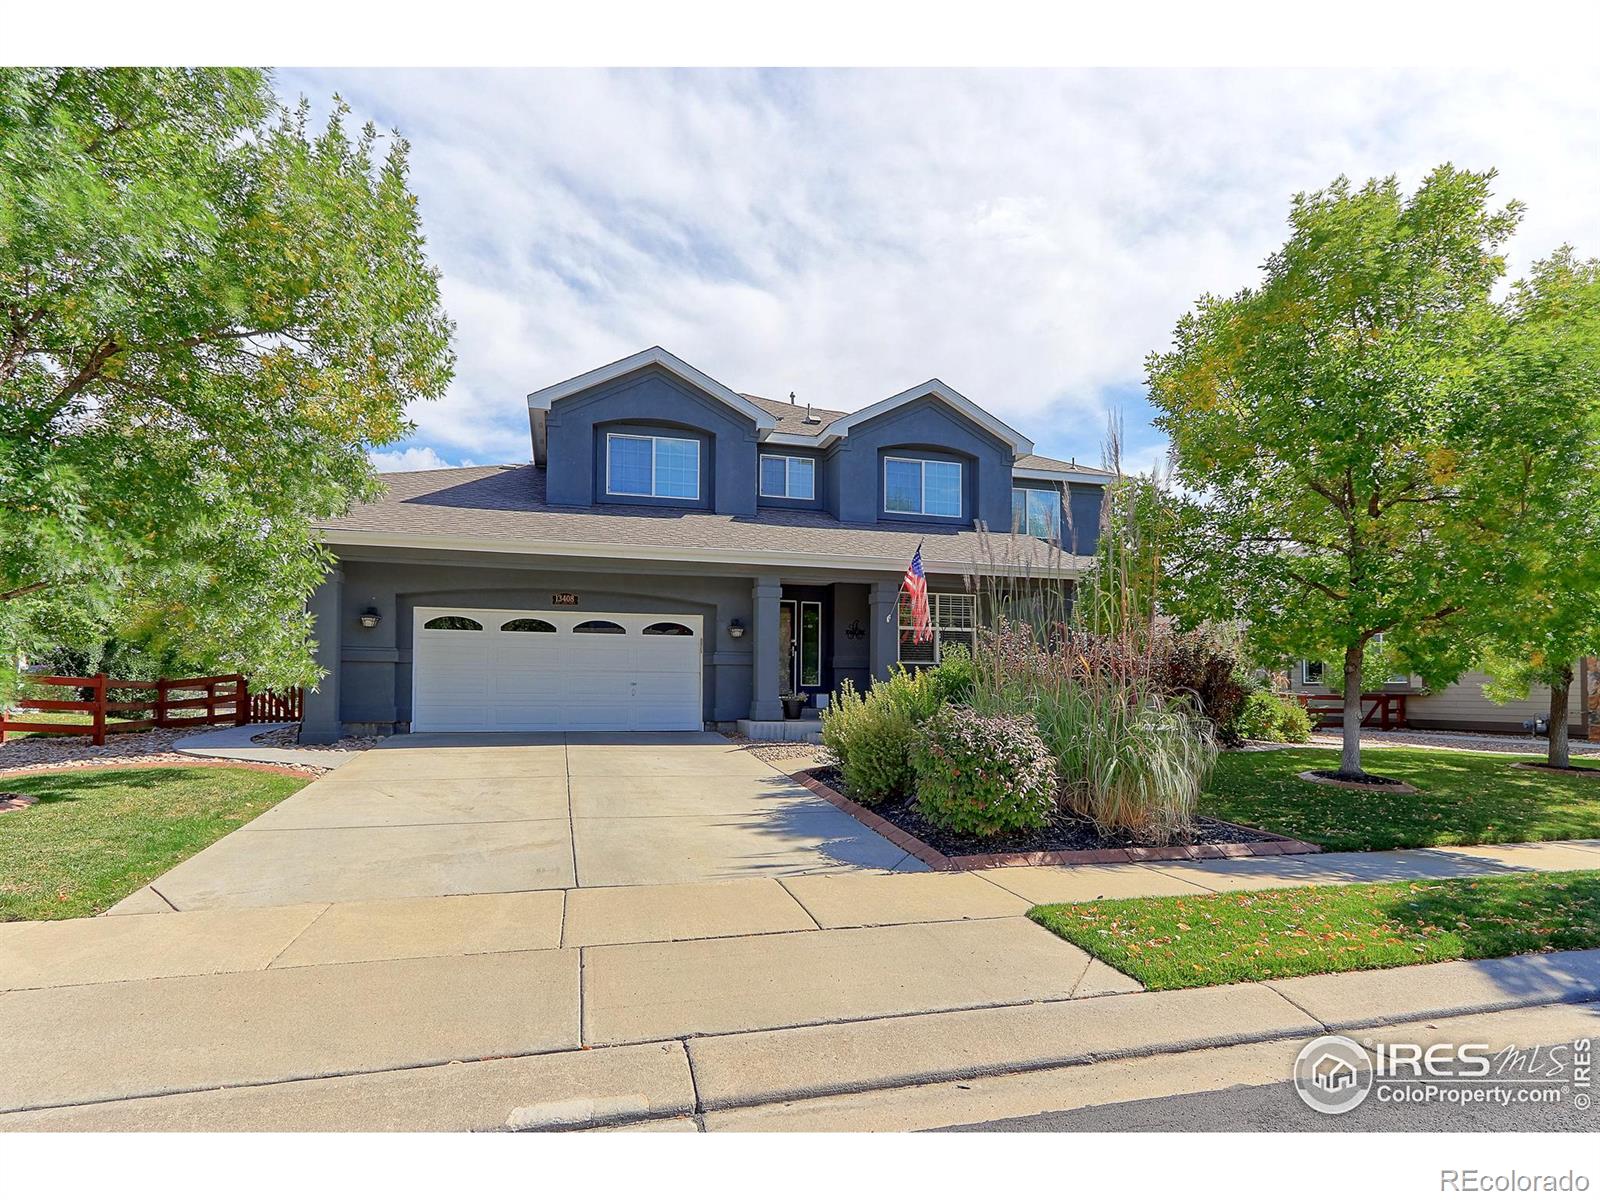 13408  king lake trail, Broomfield sold home. Closed on 2023-12-07 for $1,000,000.